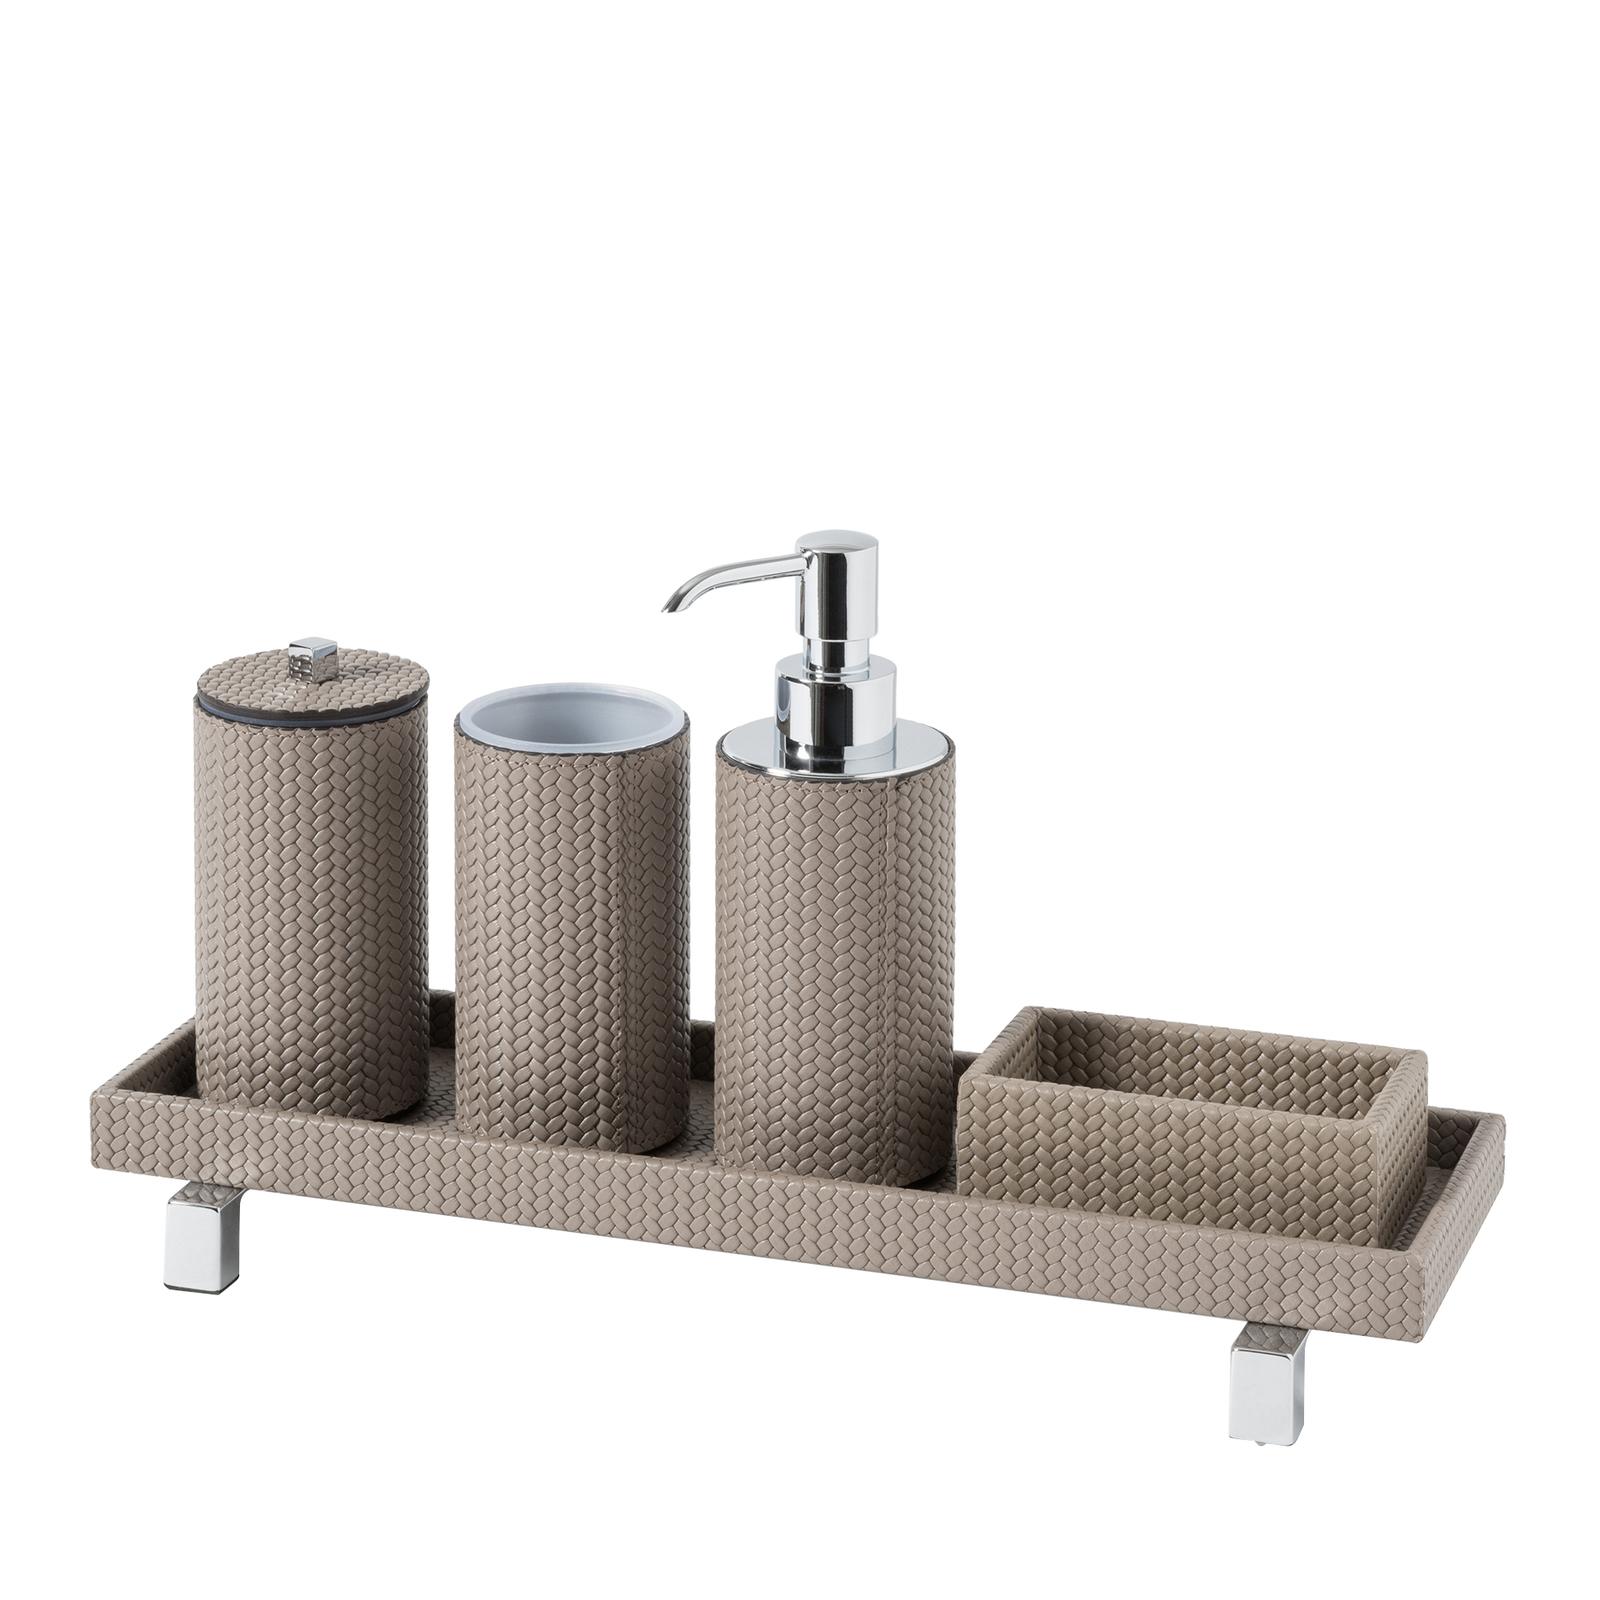 A stunning and elegant addition to a contemporary bathroom, this set is crafted of leather and is part of the Poseidon collection. It features a rectangular tray supporting an open container and three accessories with a round base: a soap dispenser,